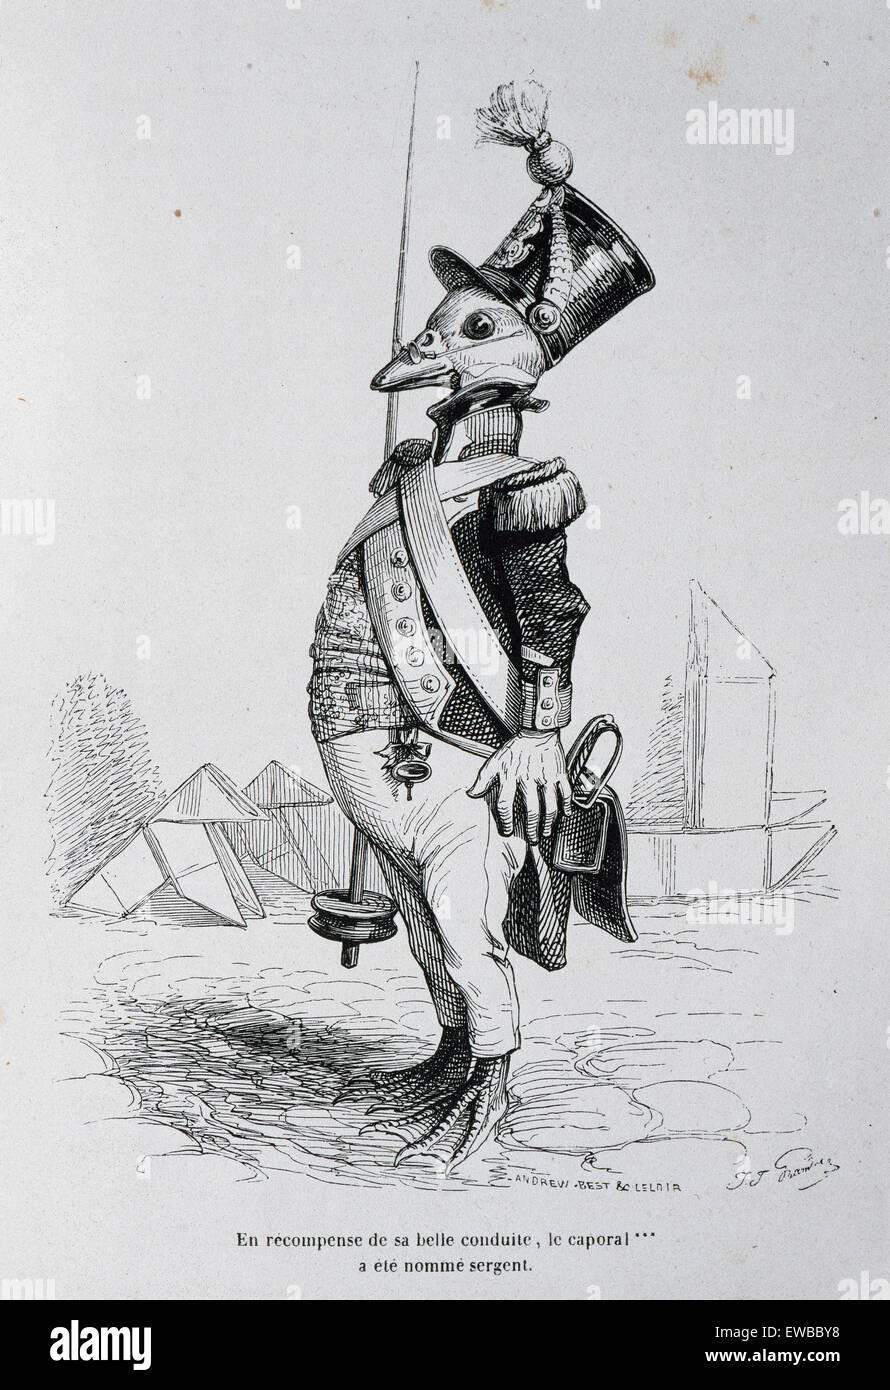 J.J. Grandville (pseudonym of Jean Ignace Isidore Gerard) (1803-1847). French caricaturist. The private and public life of animals. Satire of French society of 1840 through the eyes of animals. Satiric lithography. Paris, edited by J. Hetzel, 1842. Stock Photo